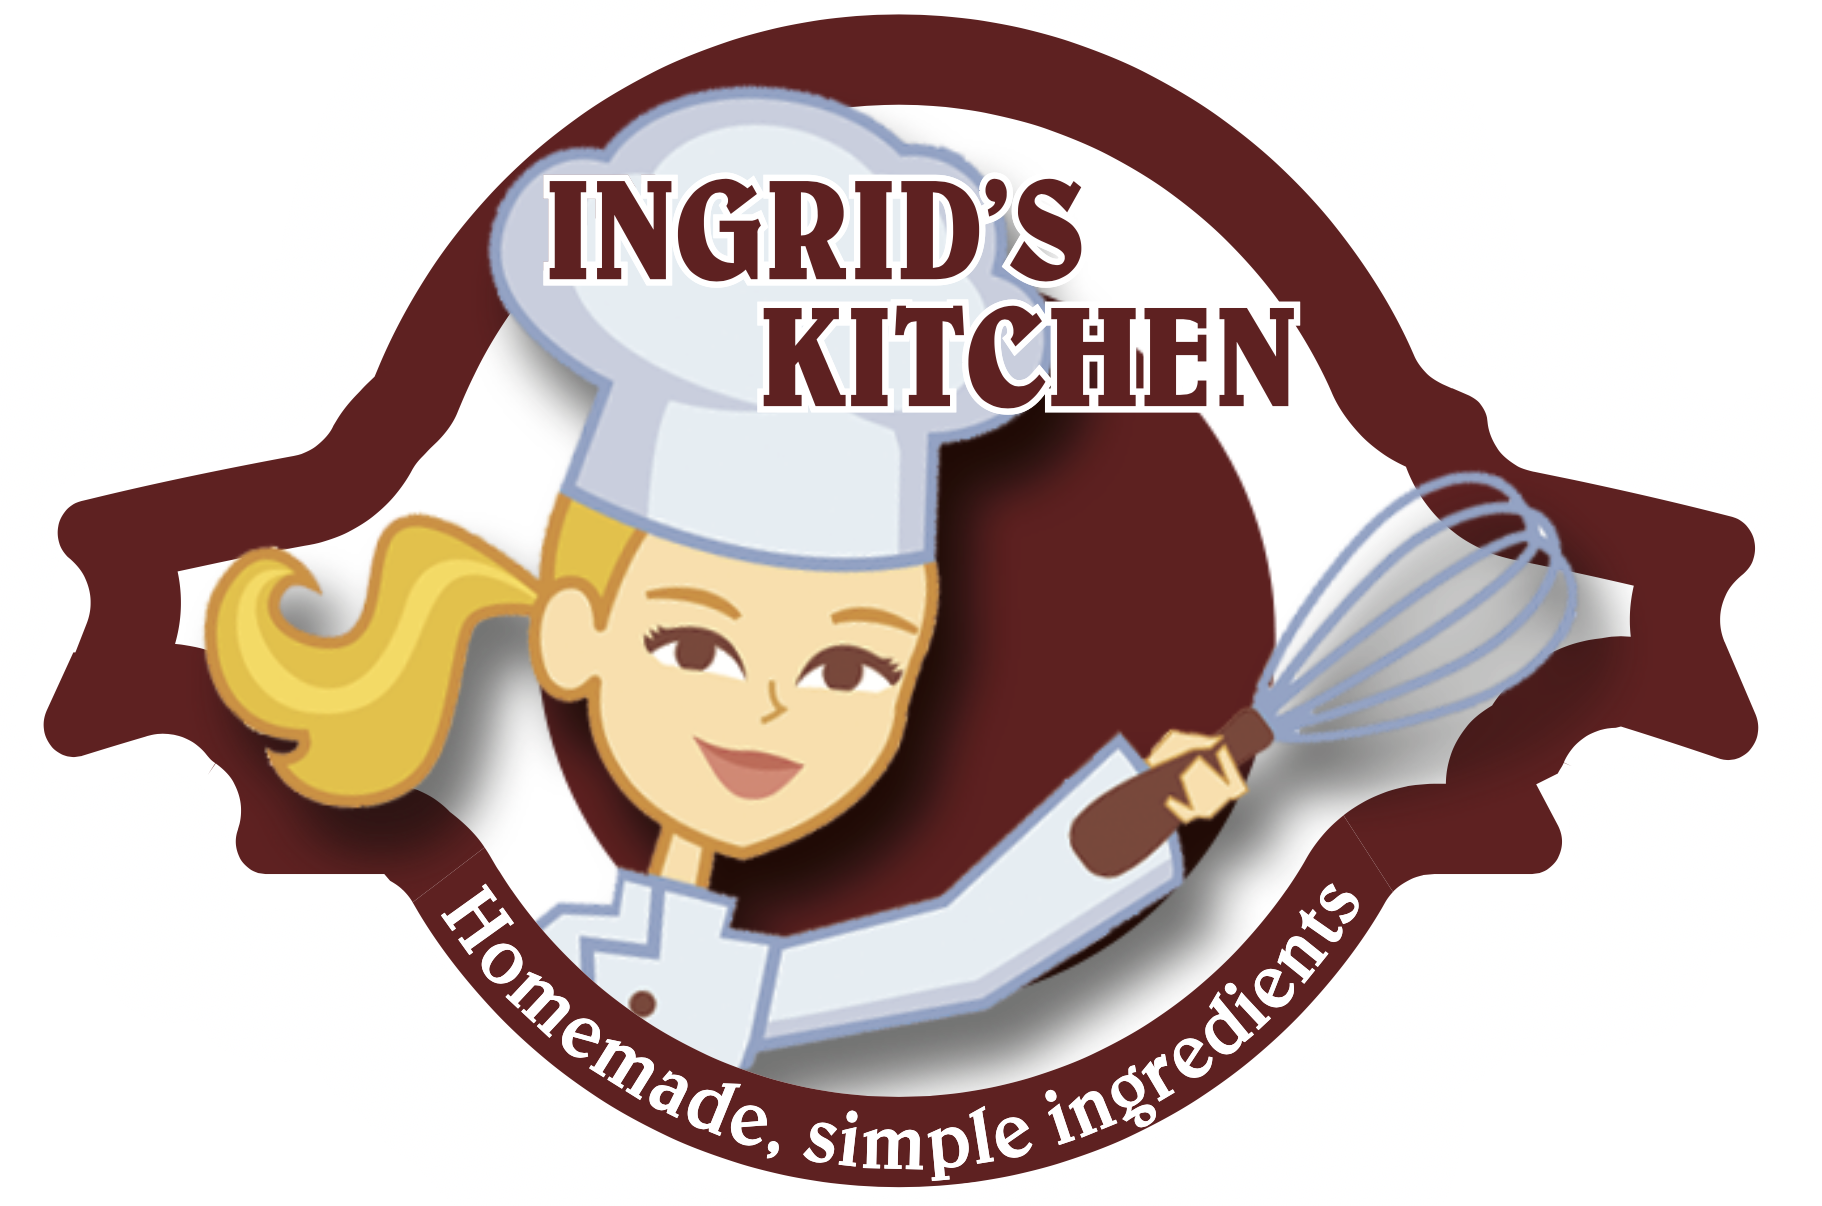 Sunripe on X: "What is your favourite #meal from Ingrid's Kitchen? Ingrid's  #Kitchen just got an #upgrade - you'll start to see this #label being used  on all of our kitchen products!